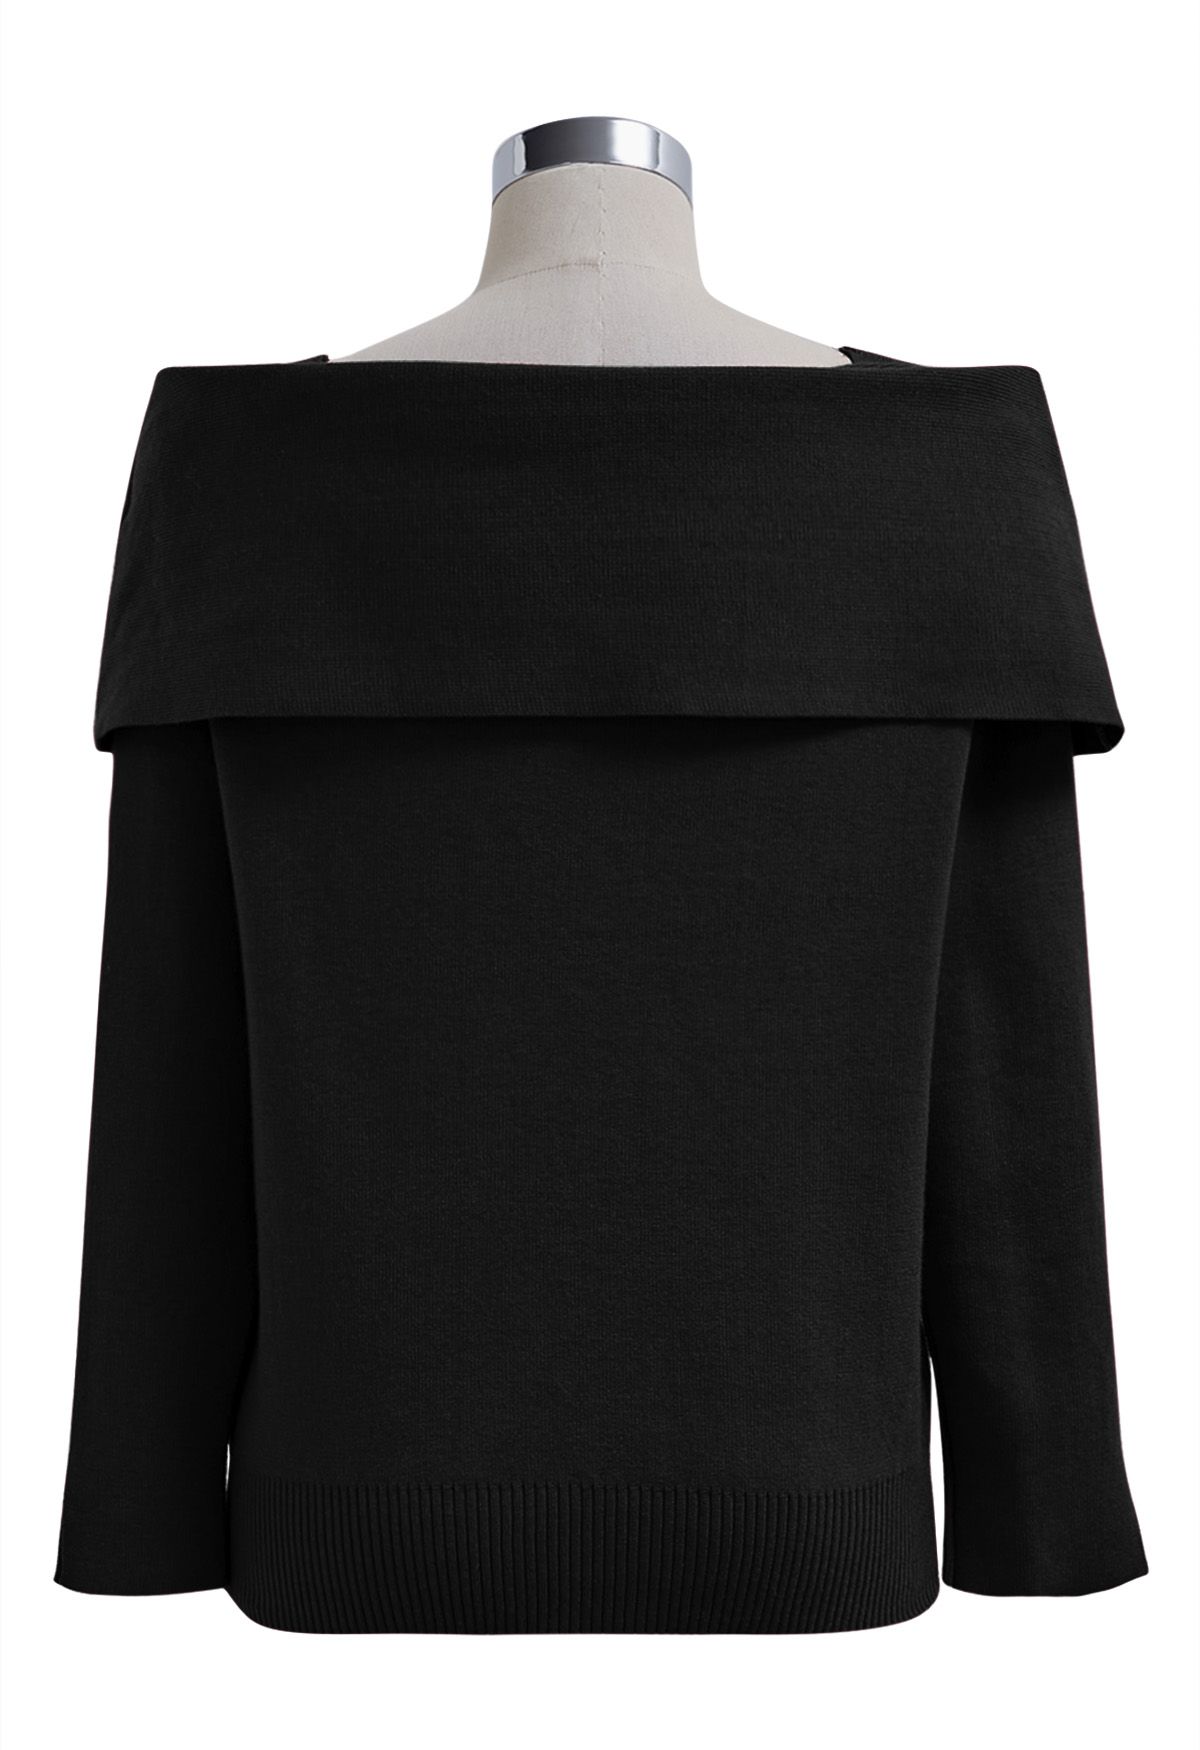 Alluring Side Knot Knit Top in Black